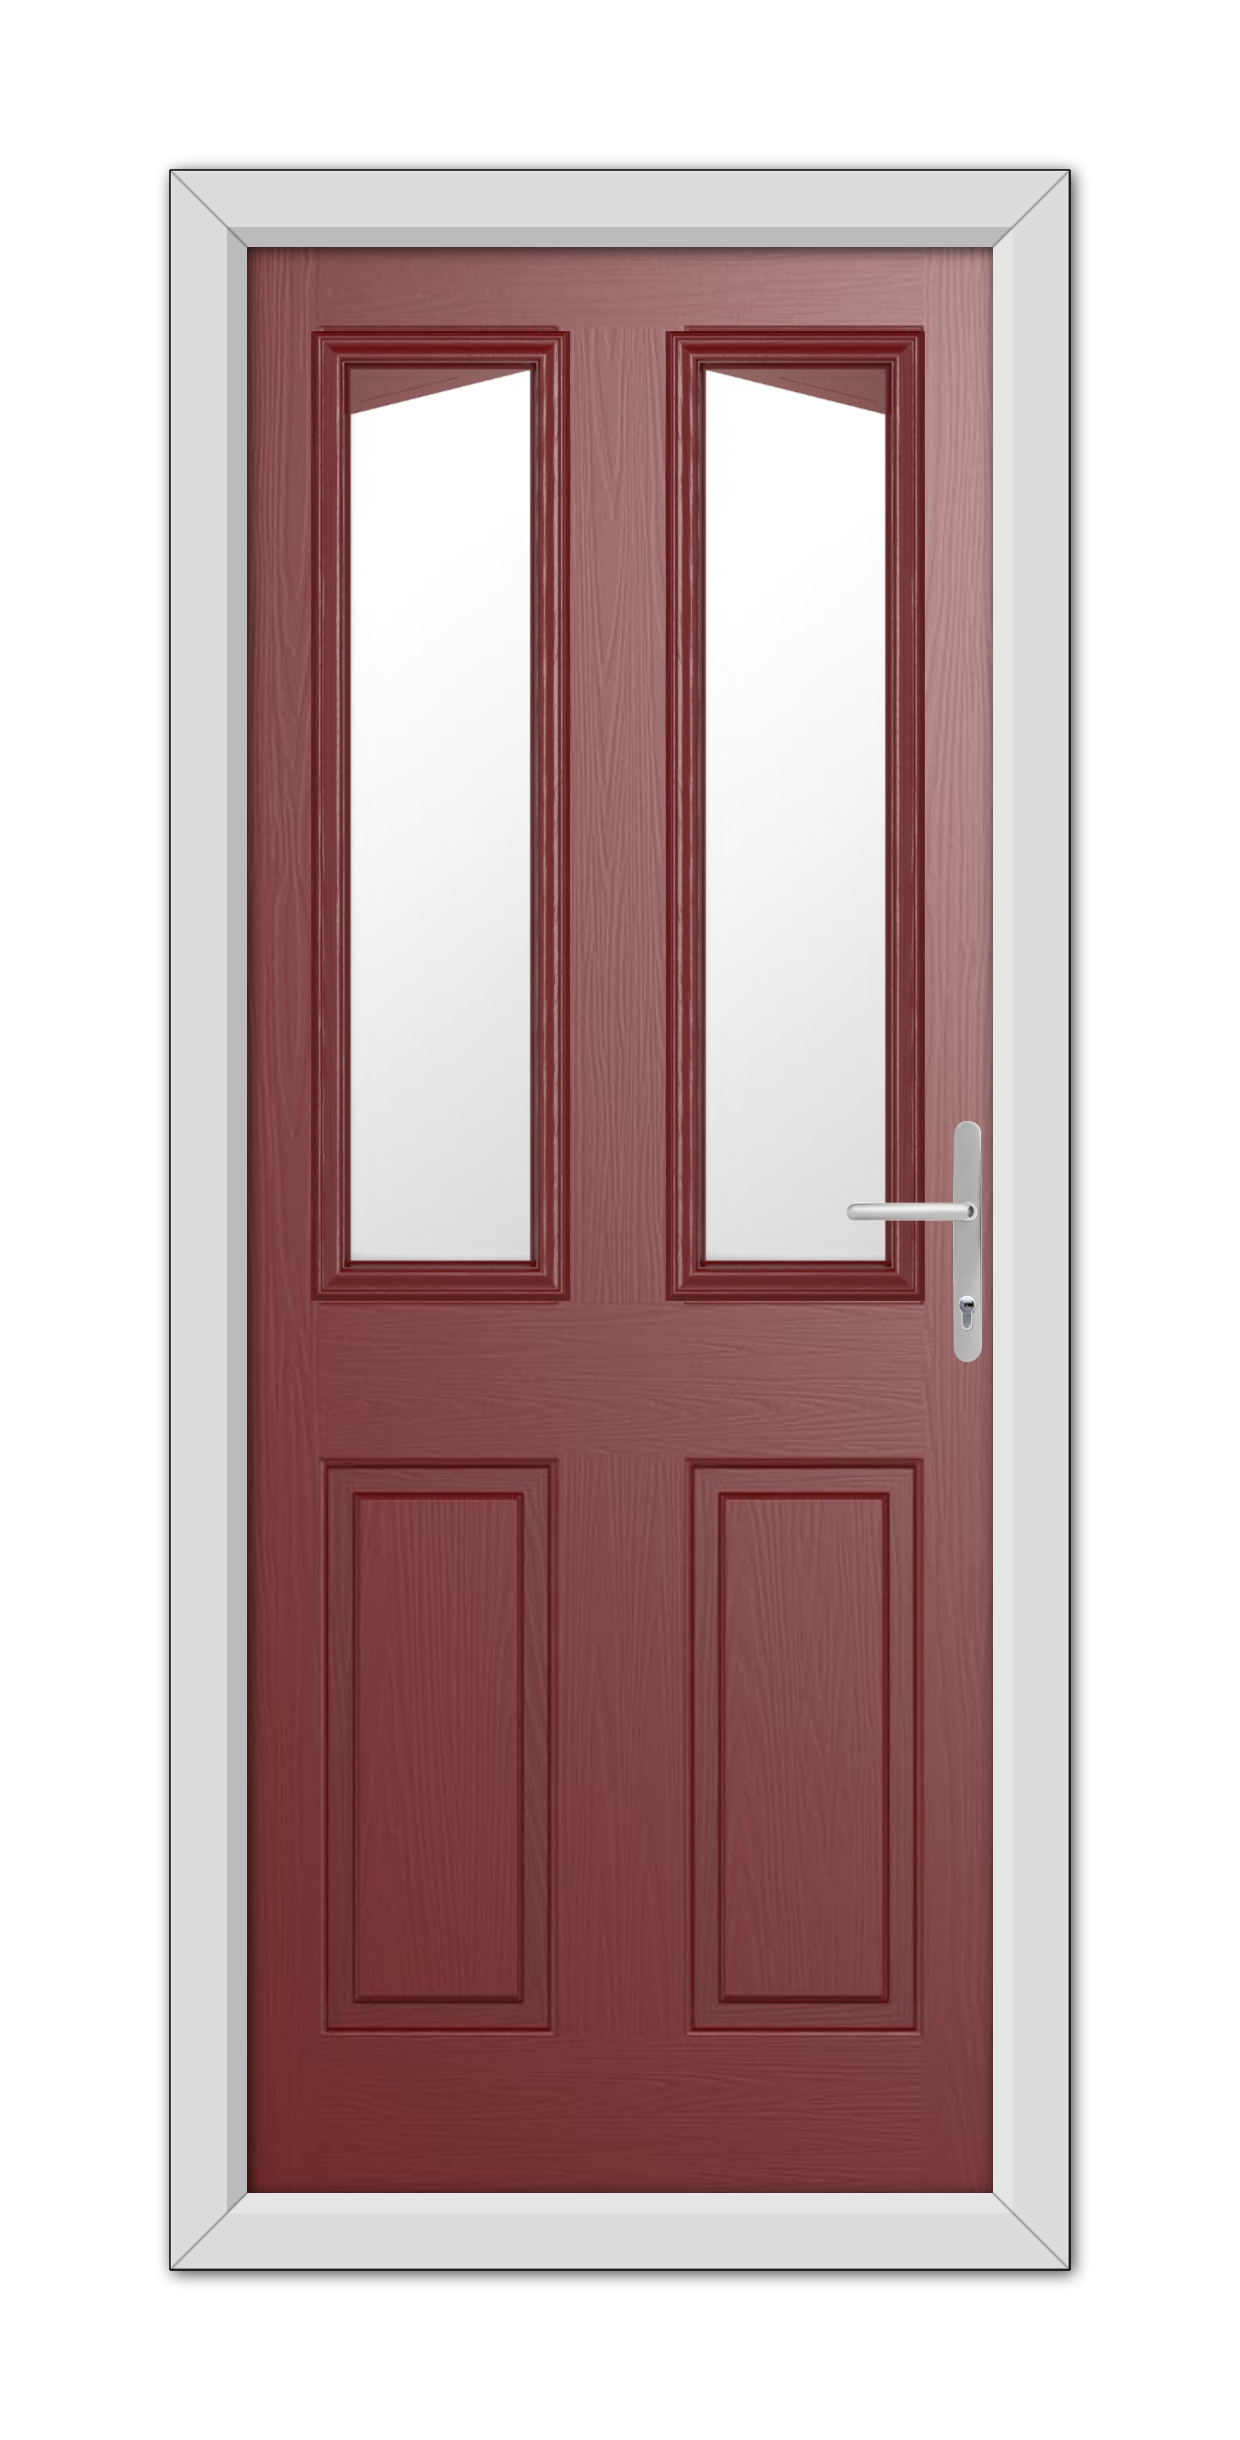 Red Highbury Composite Door 48mm Timber Core with white trim, featuring rectangular windows at the top and a silver handle on the right.